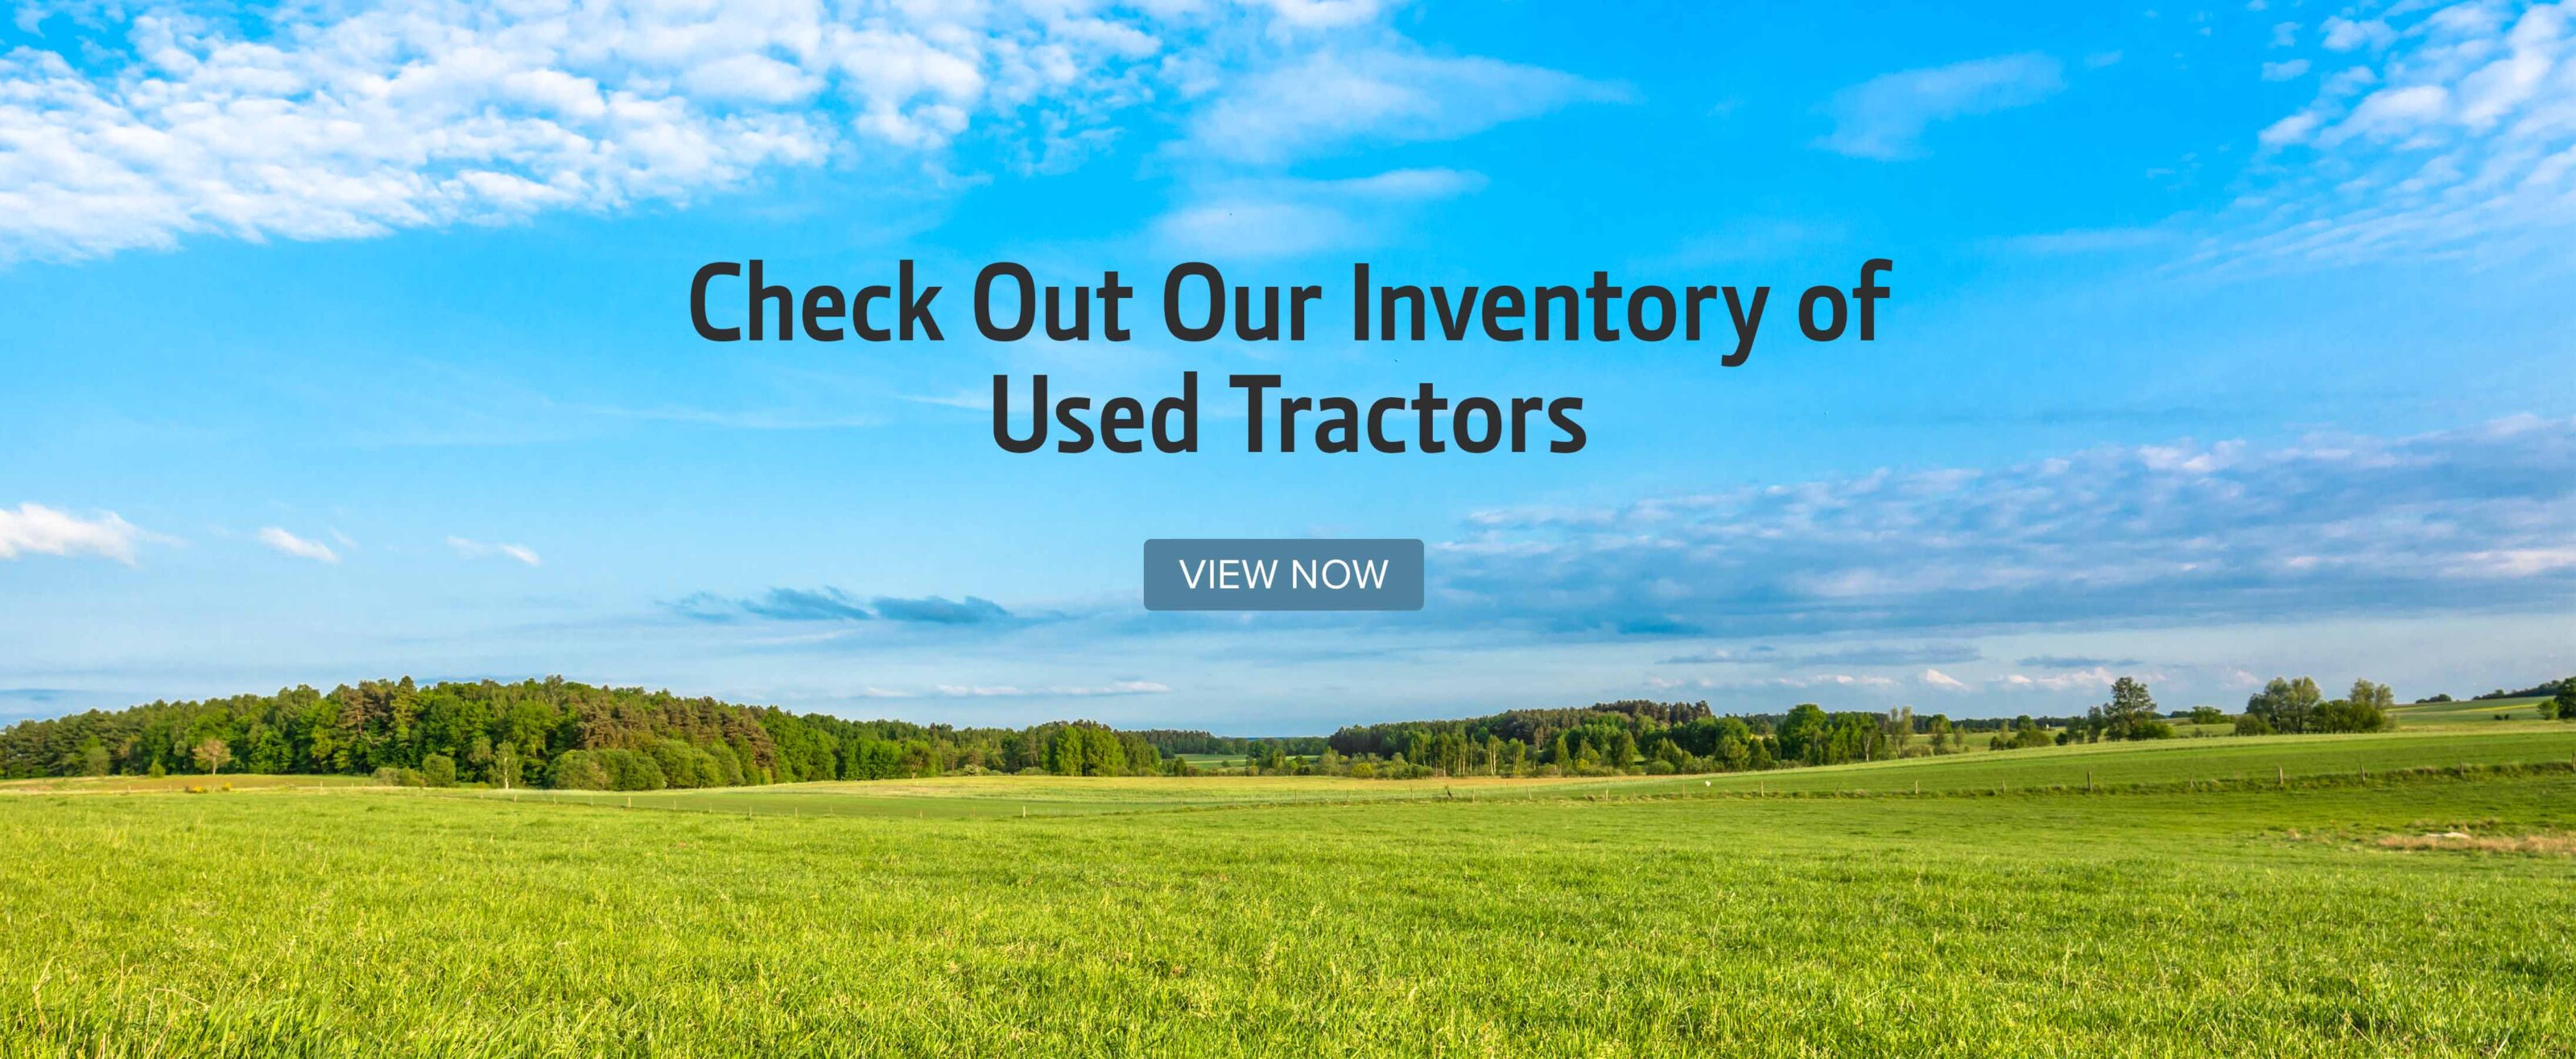 Check Out Our Inventory of Used Tractors